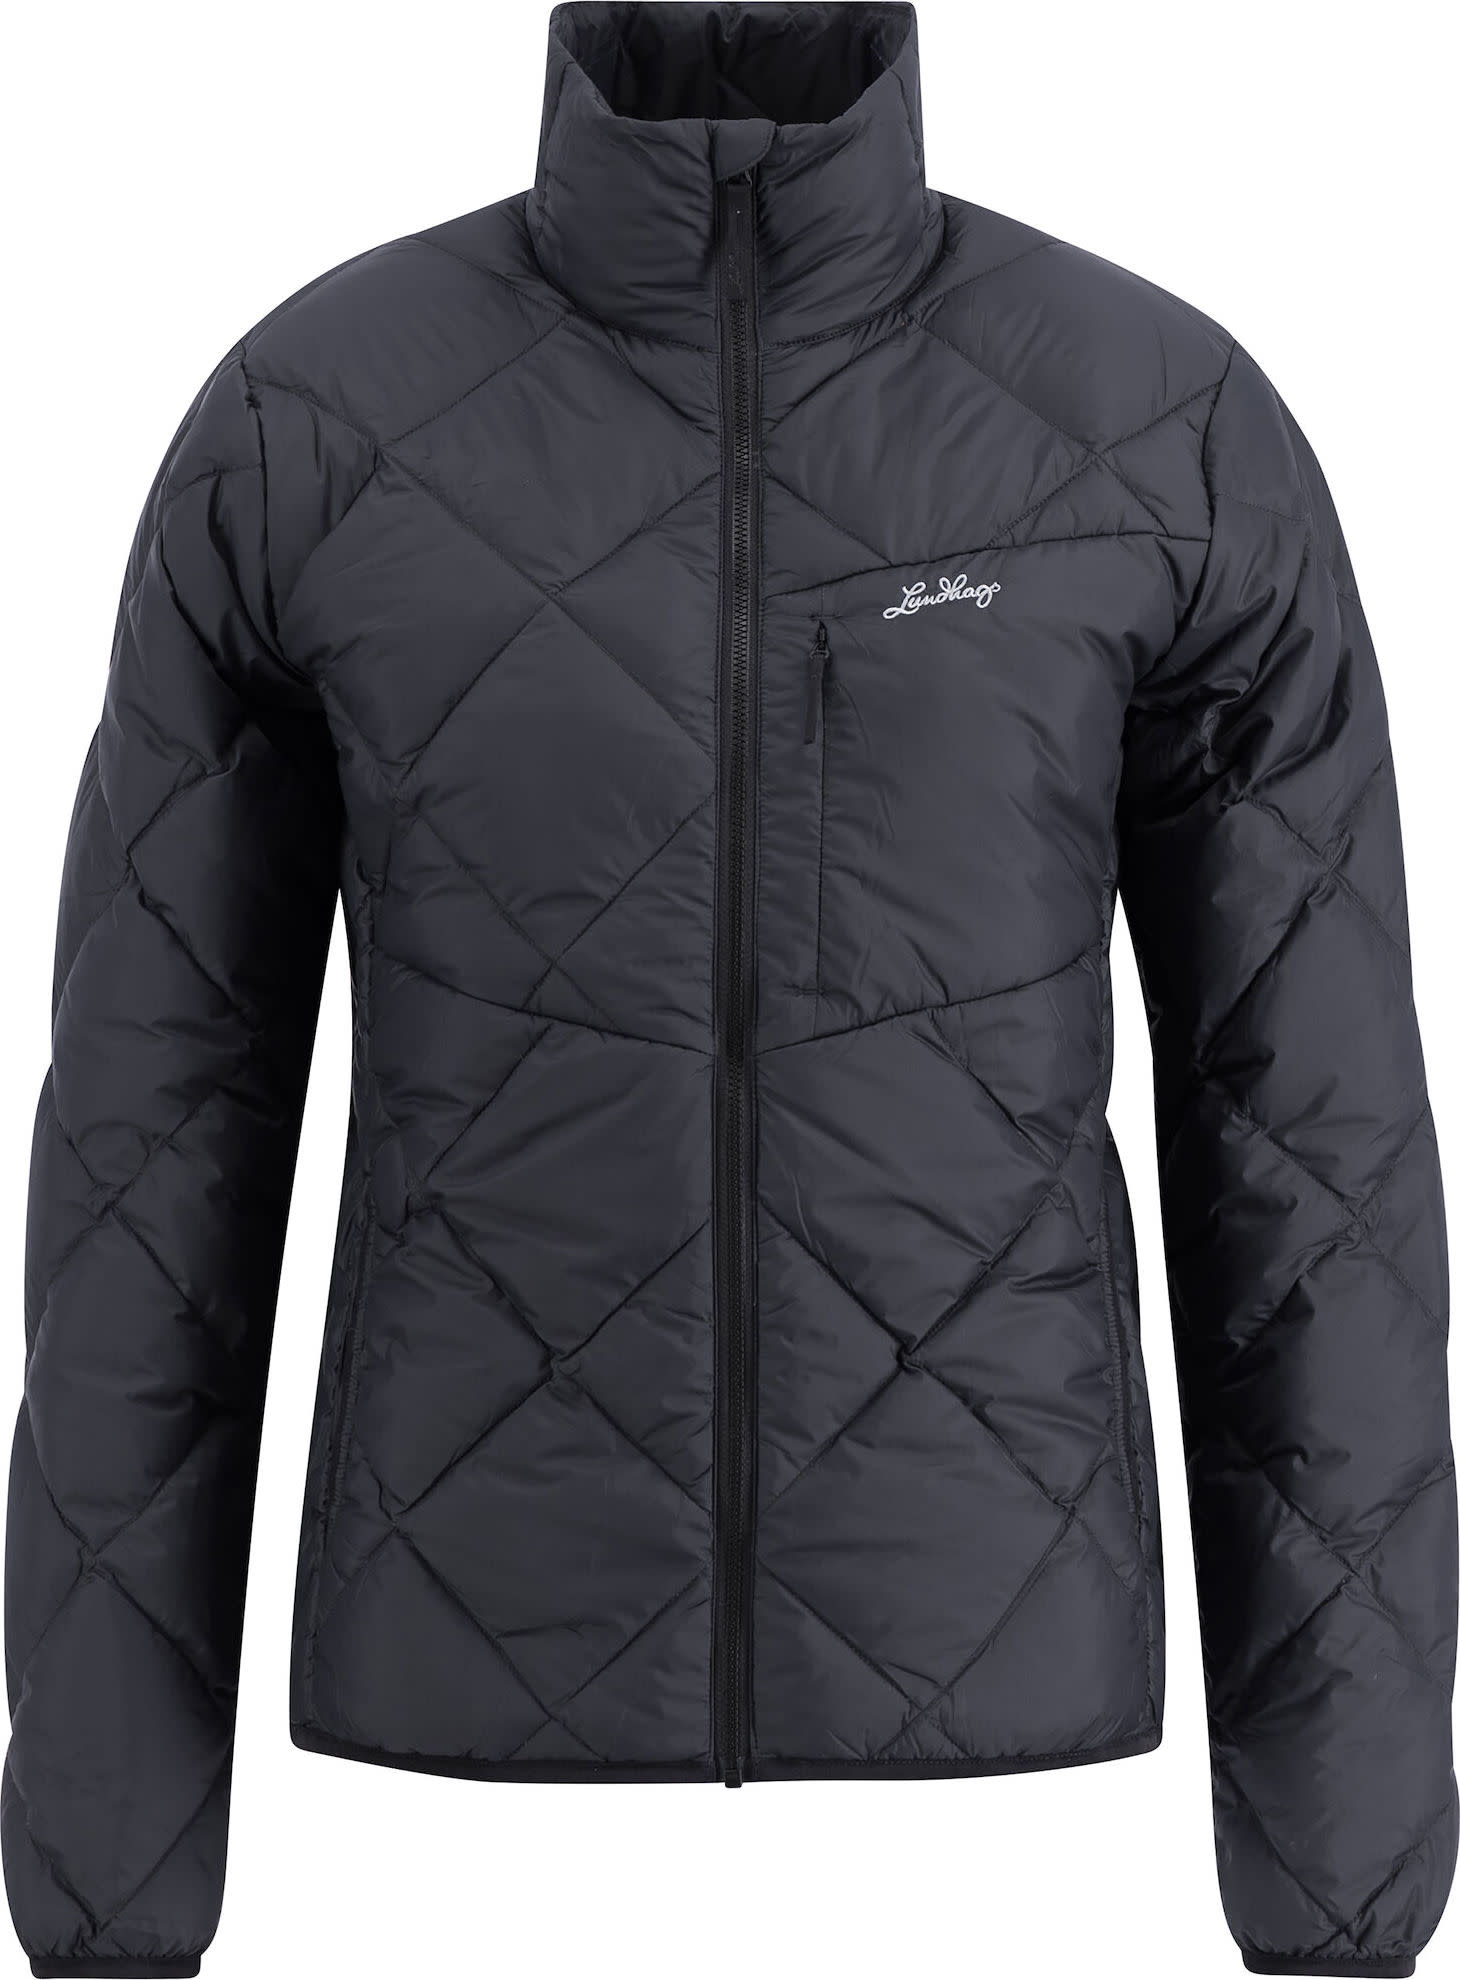 Lundhags Women’s Tived Down Jacket Black